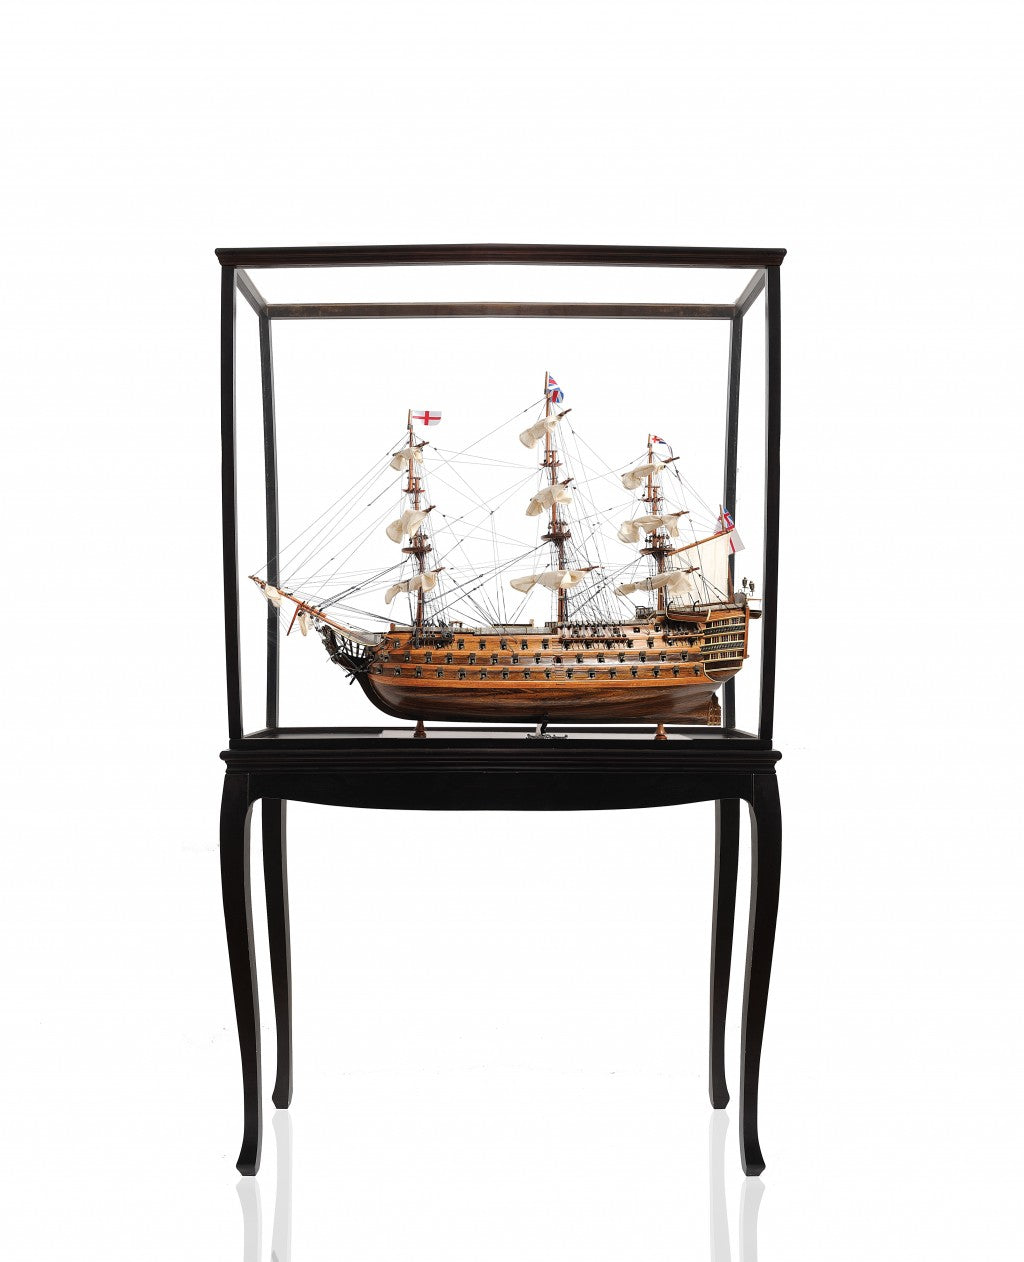 69" Wood Brown HMS Victory Large Floor Display Boat Hand Painted Decorative Boat